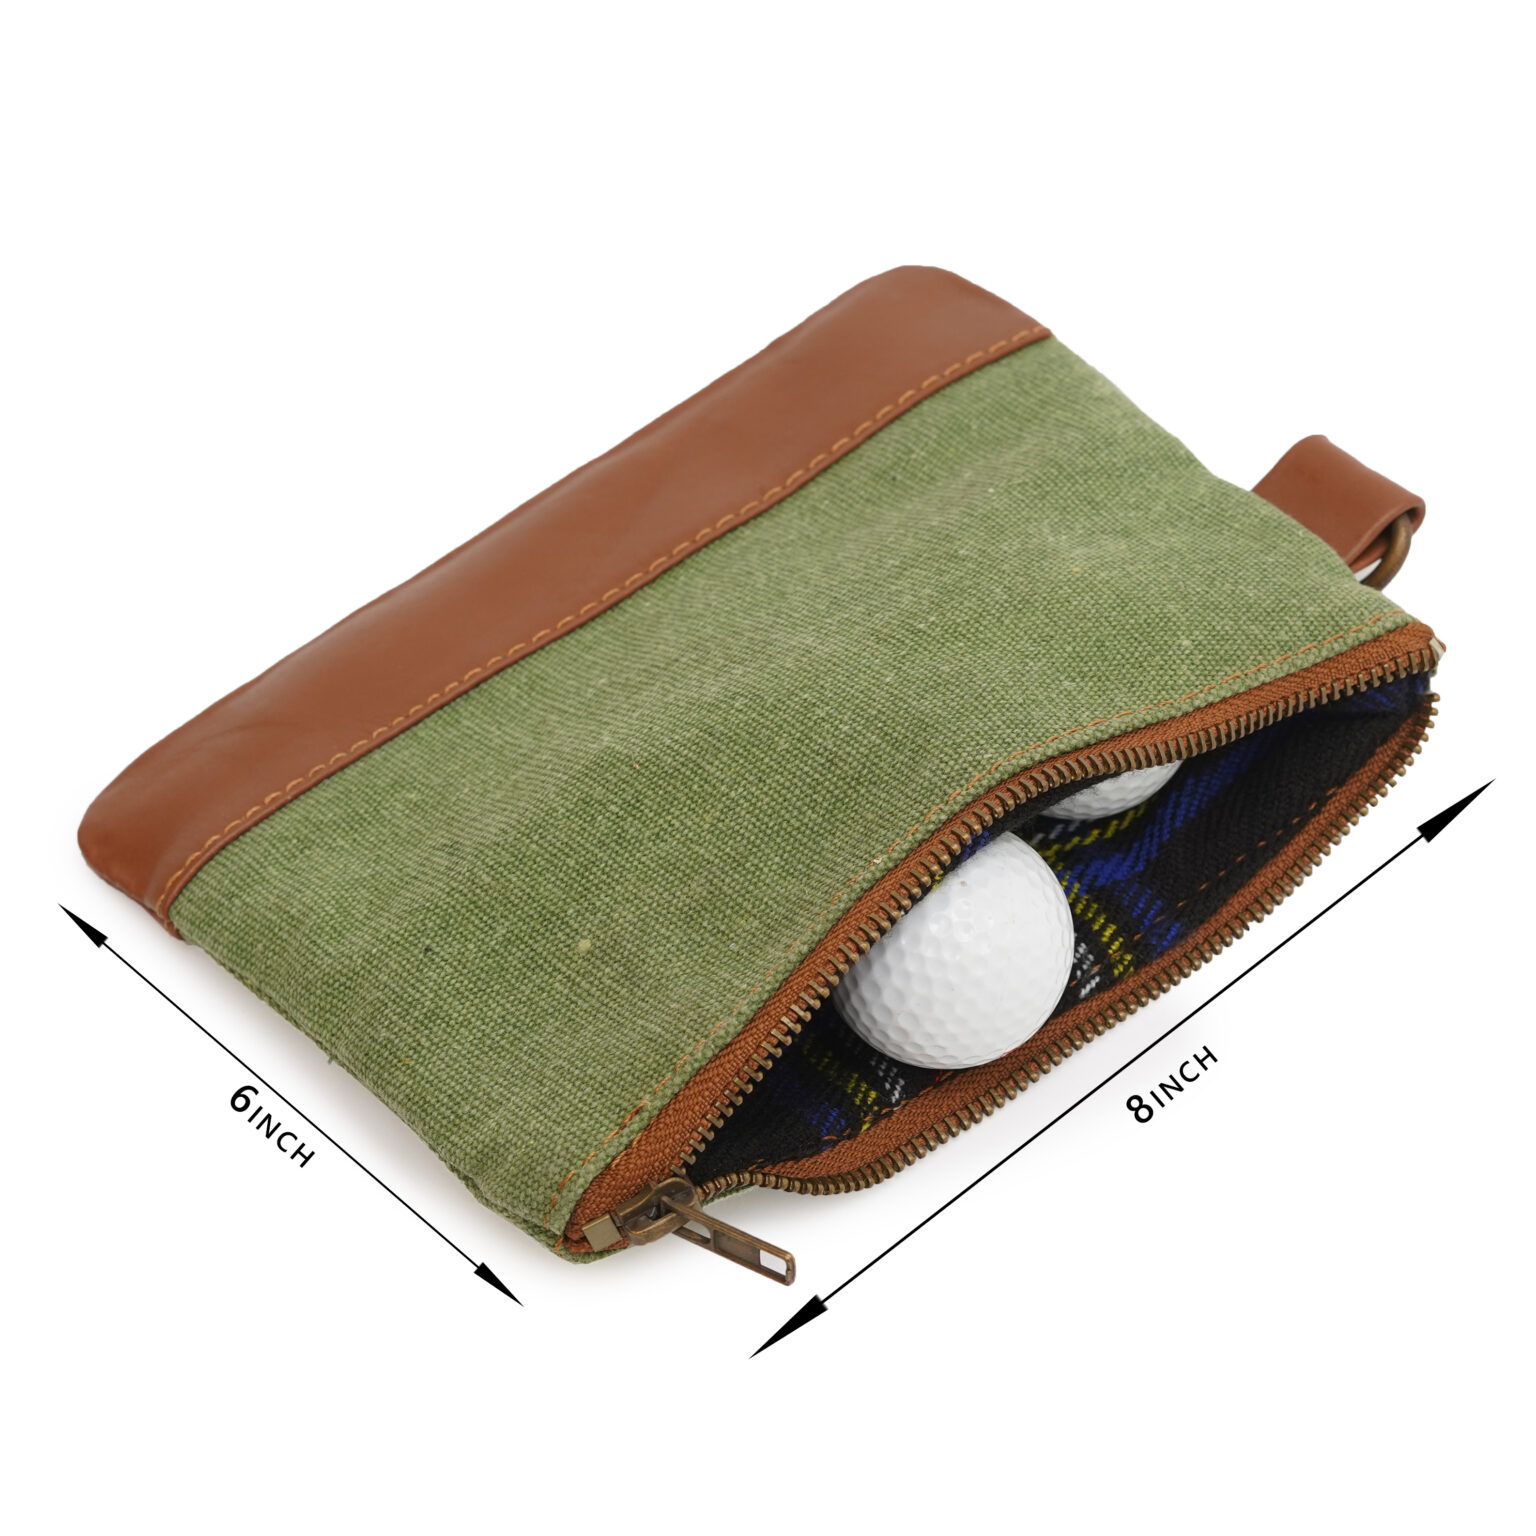 Golf Accessories, Golf Pouch, Golf Valuables Pouch